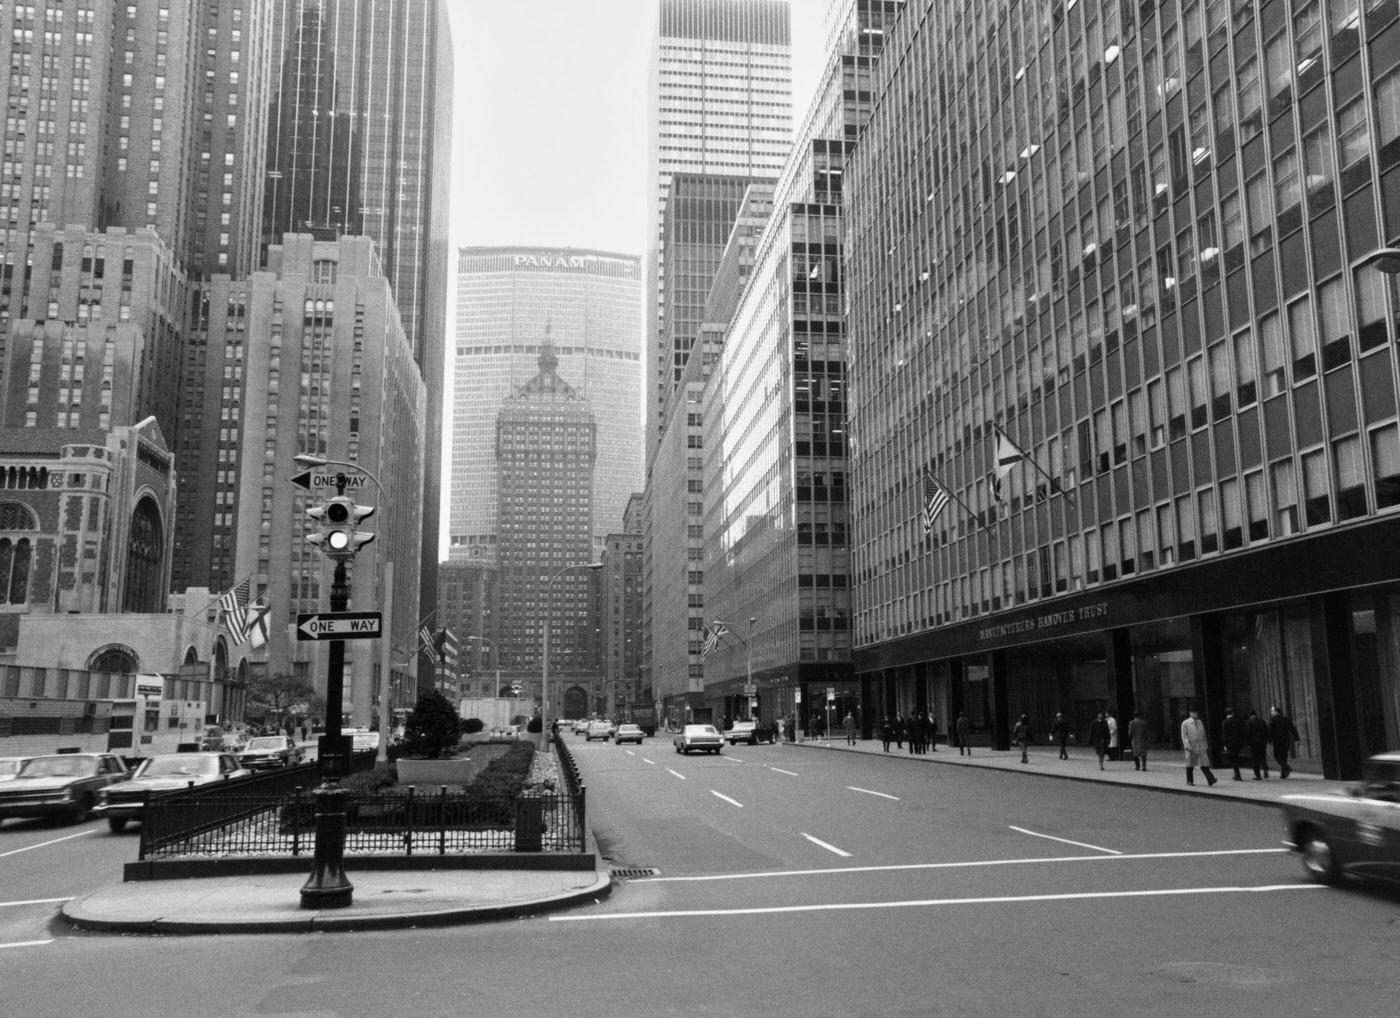 General View Of Park Avenue With The New York Central Building And The Pan Am Building In The Background, Manhattan, 1967